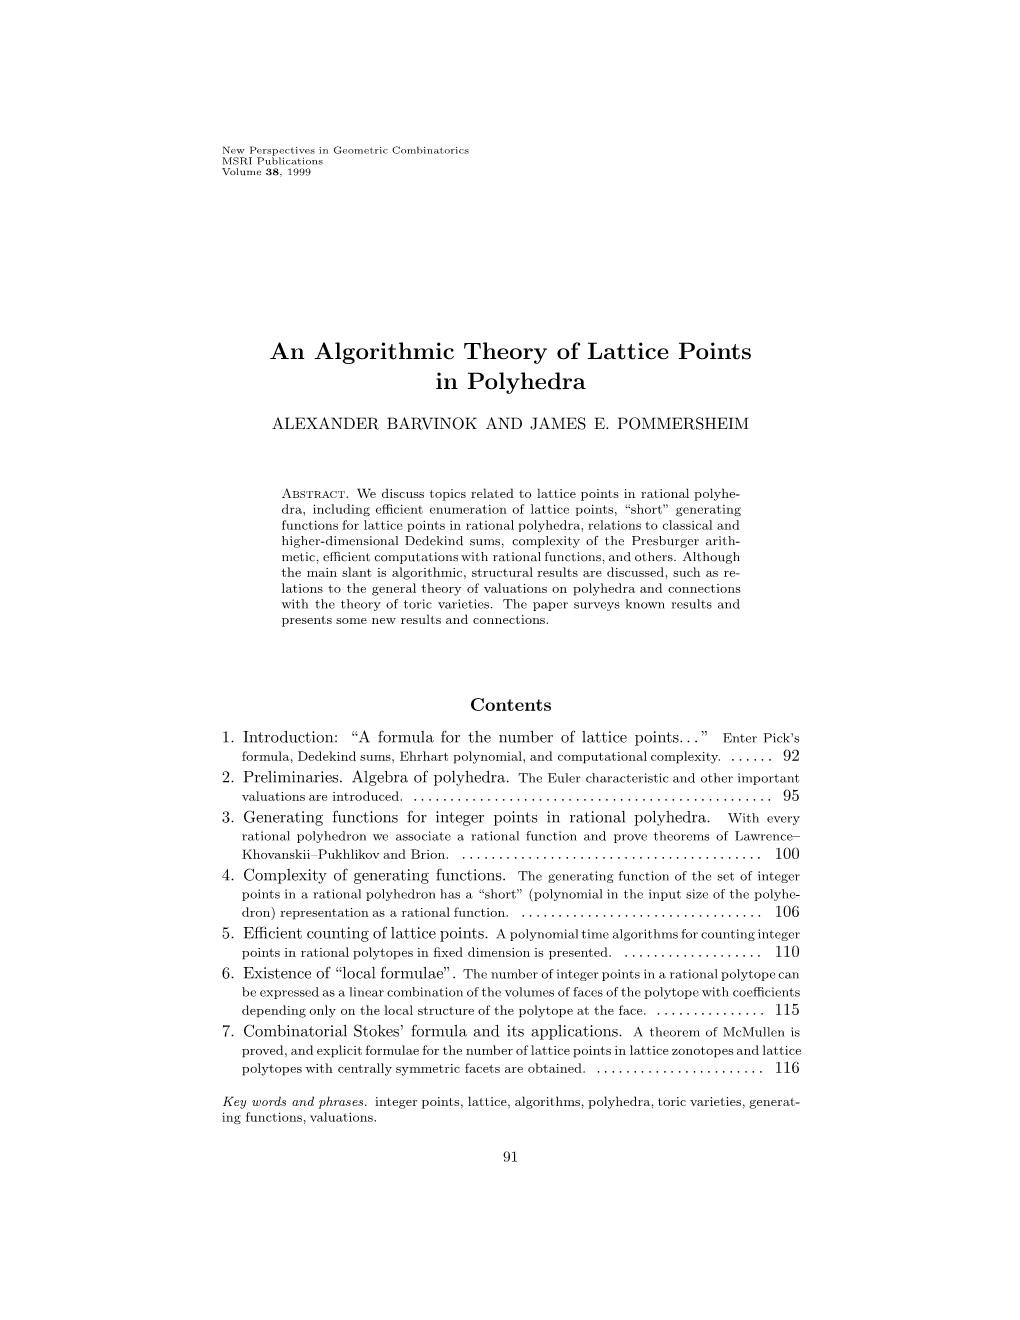 An Algorithmic Theory of Lattice Points in Polyhedra